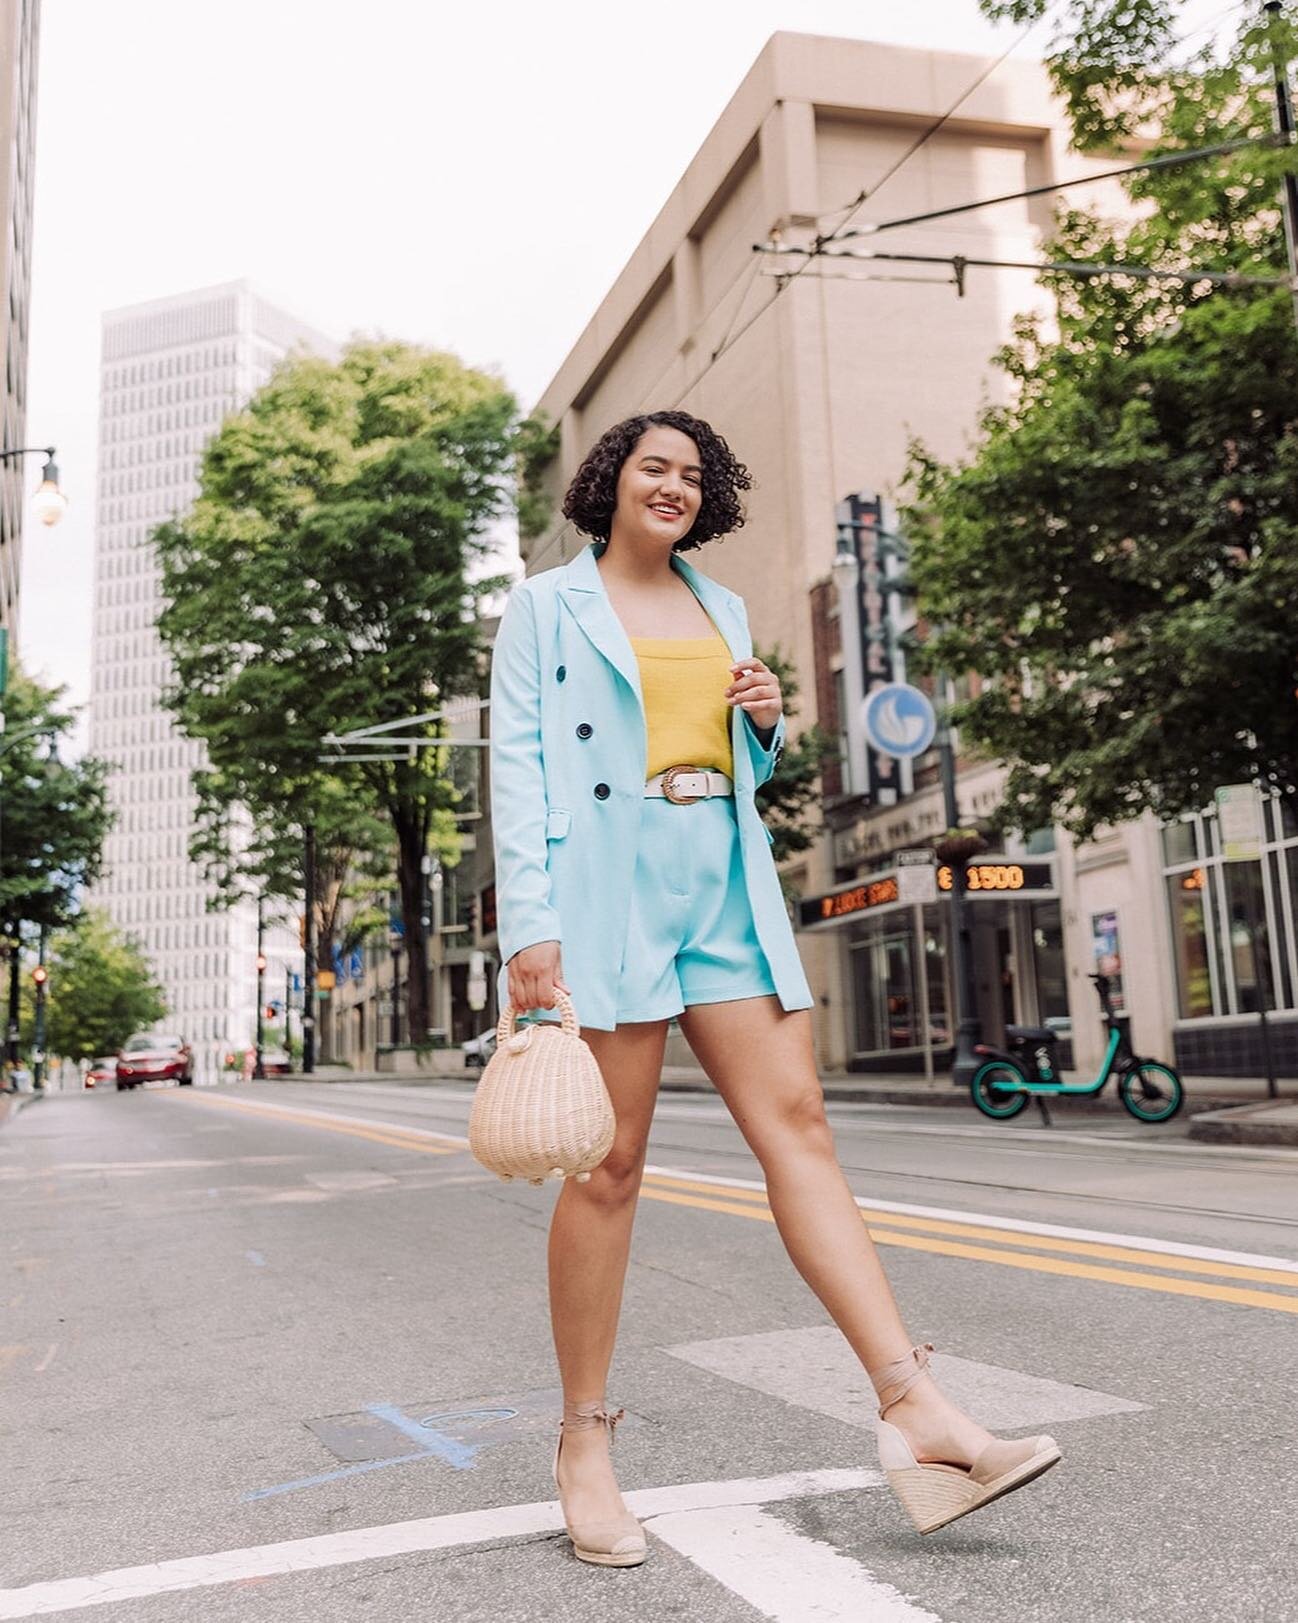 Here's to hoping your week is as fabulous as @sequinsandsales looks 😍
⠀⠀⠀⠀⠀⠀⠀⠀⠀
.
.
.
.
.
#thatsdarling #pursuepretty #flashesofdelight #lovelysquares #styledbyme #seekinspirecreate #tnchustler #createandcultivate #discoverunder5k #inspiredbythis #w